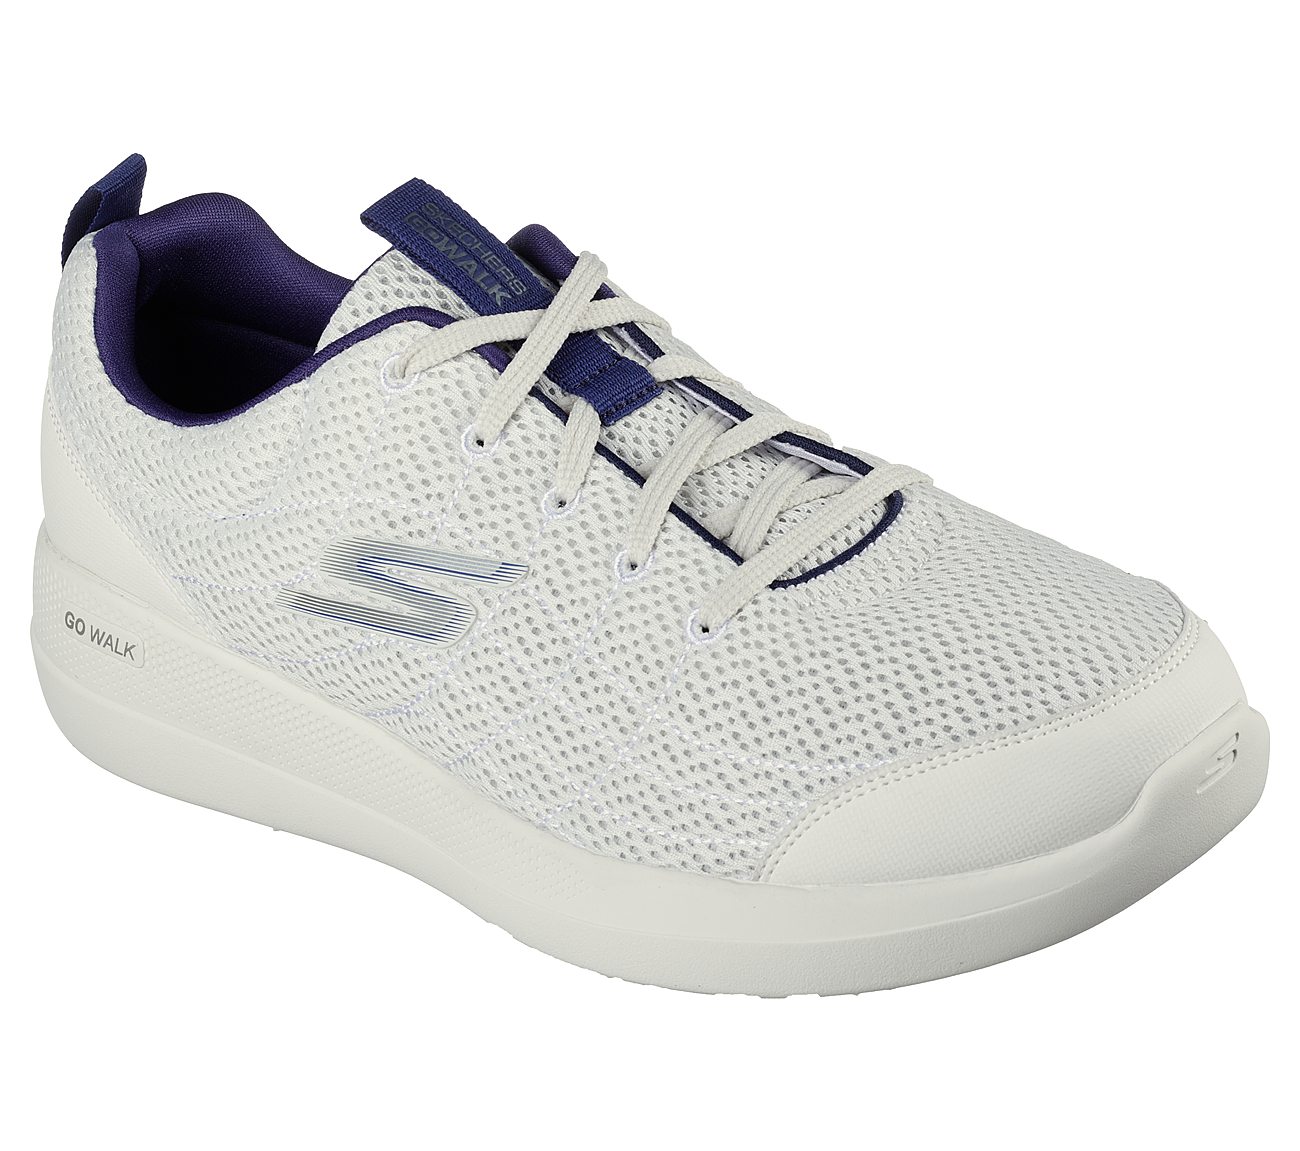 GO WALK STABILITY - ADVANCEME, WHITE/NAVY Footwear Right View